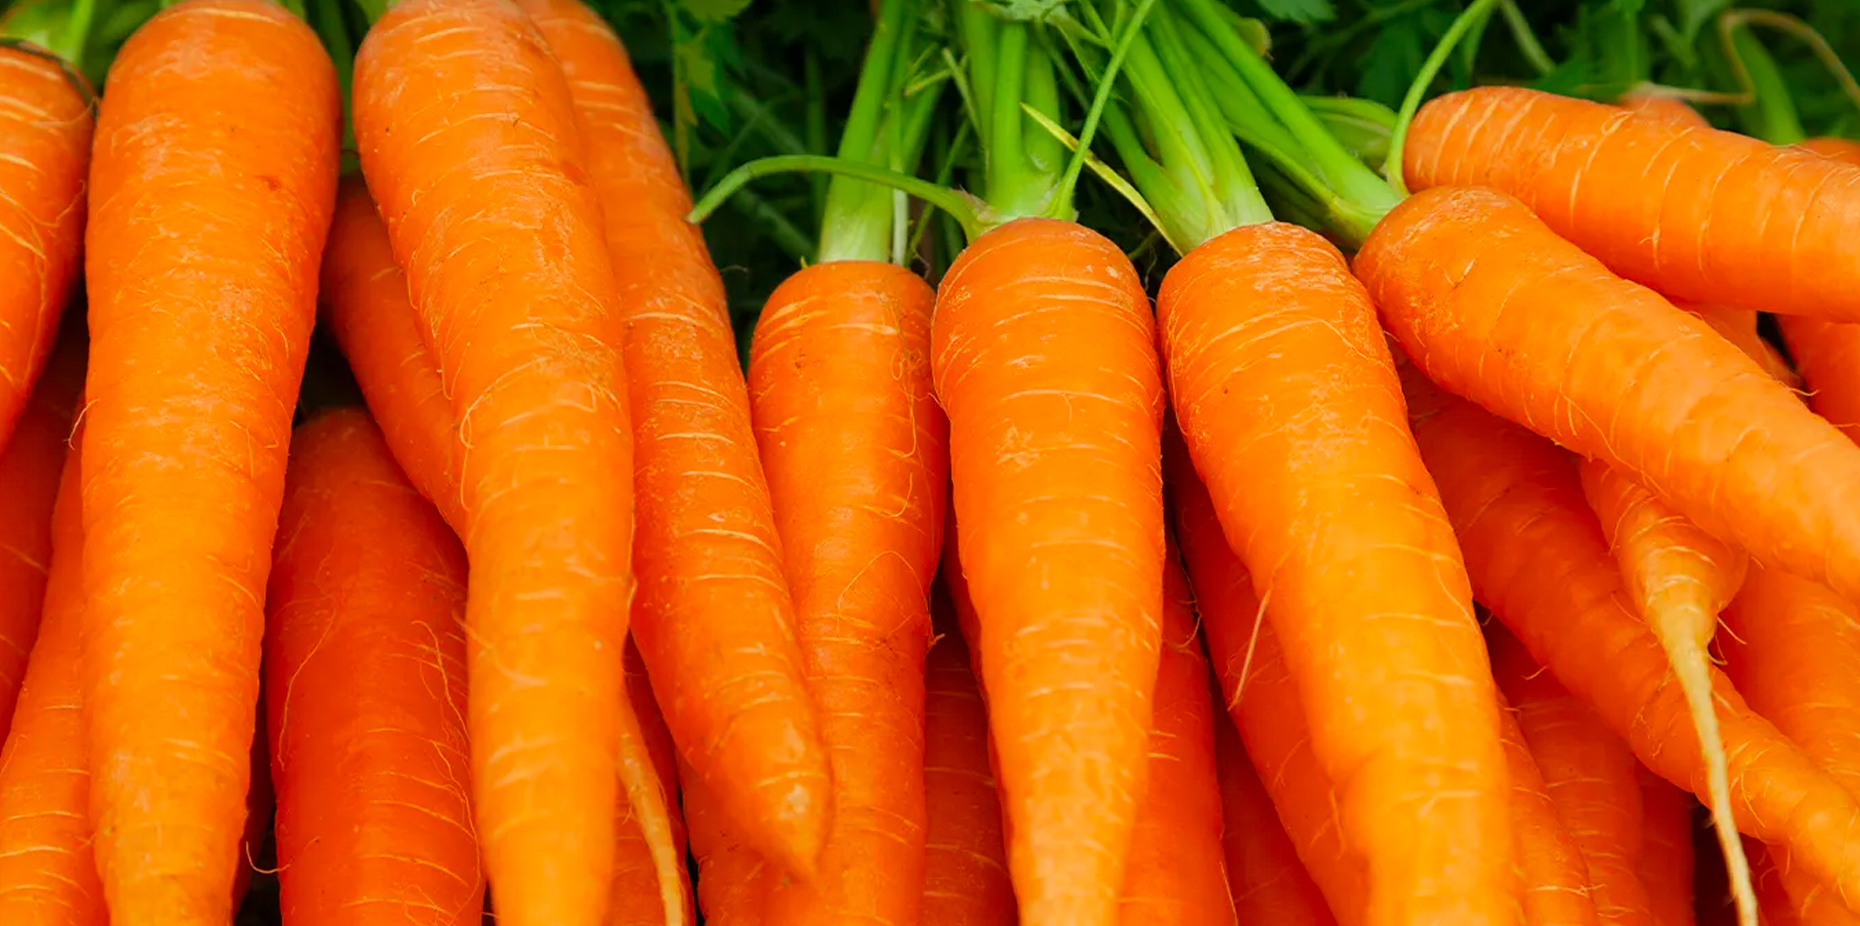 Carrots: Facts, Nutrition, Benefits, & More